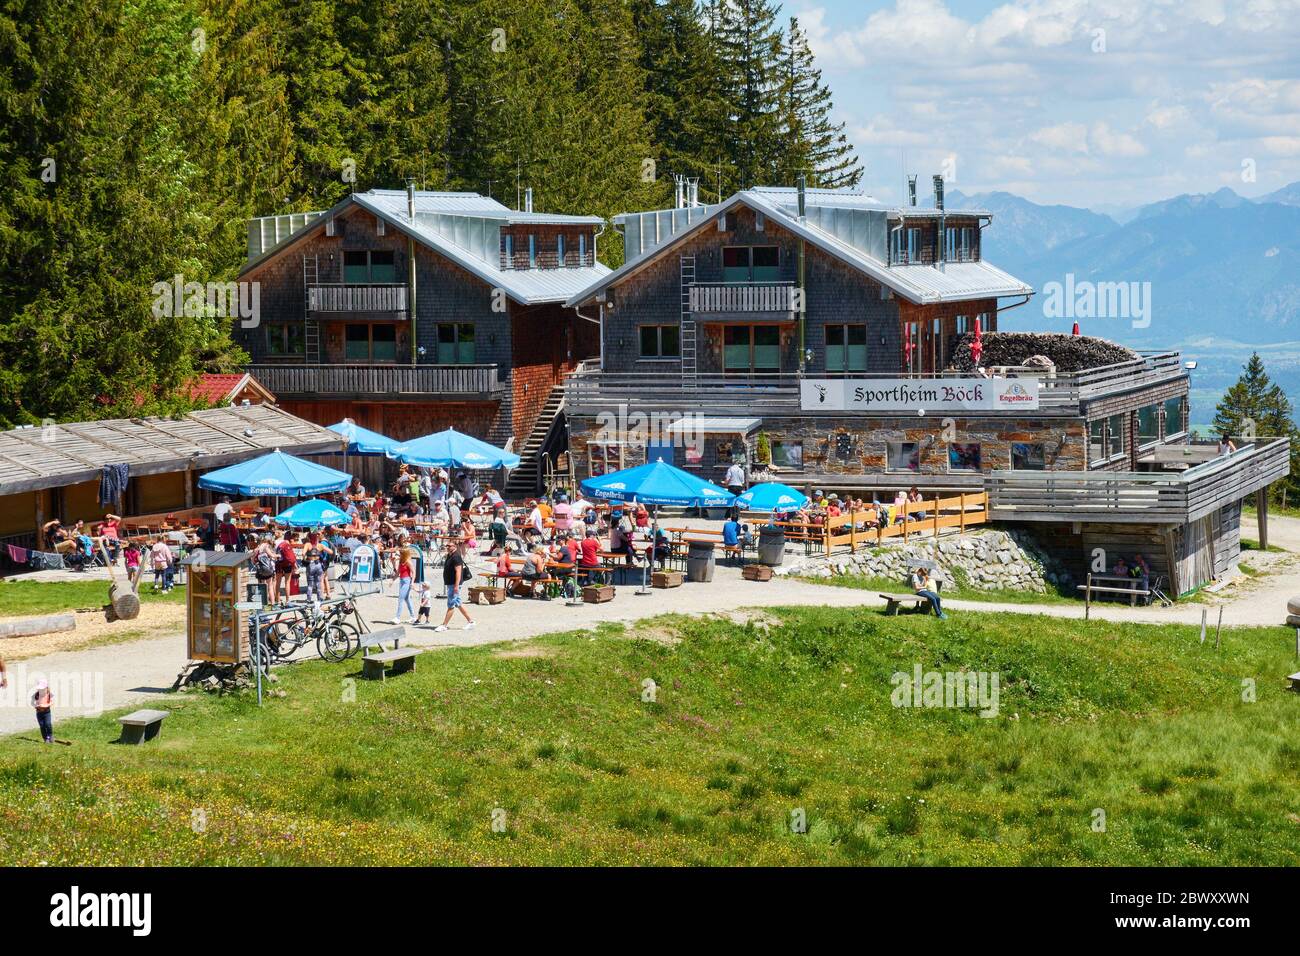 Nesselwang, Germany, 2nd of June, 2020. In Corona times, the cable car reopened and hiker are walking up to the Edelsberg peak with Sportheim Boeck mountain hut. © Peter Schatz / Alamy Live News Stock Photo